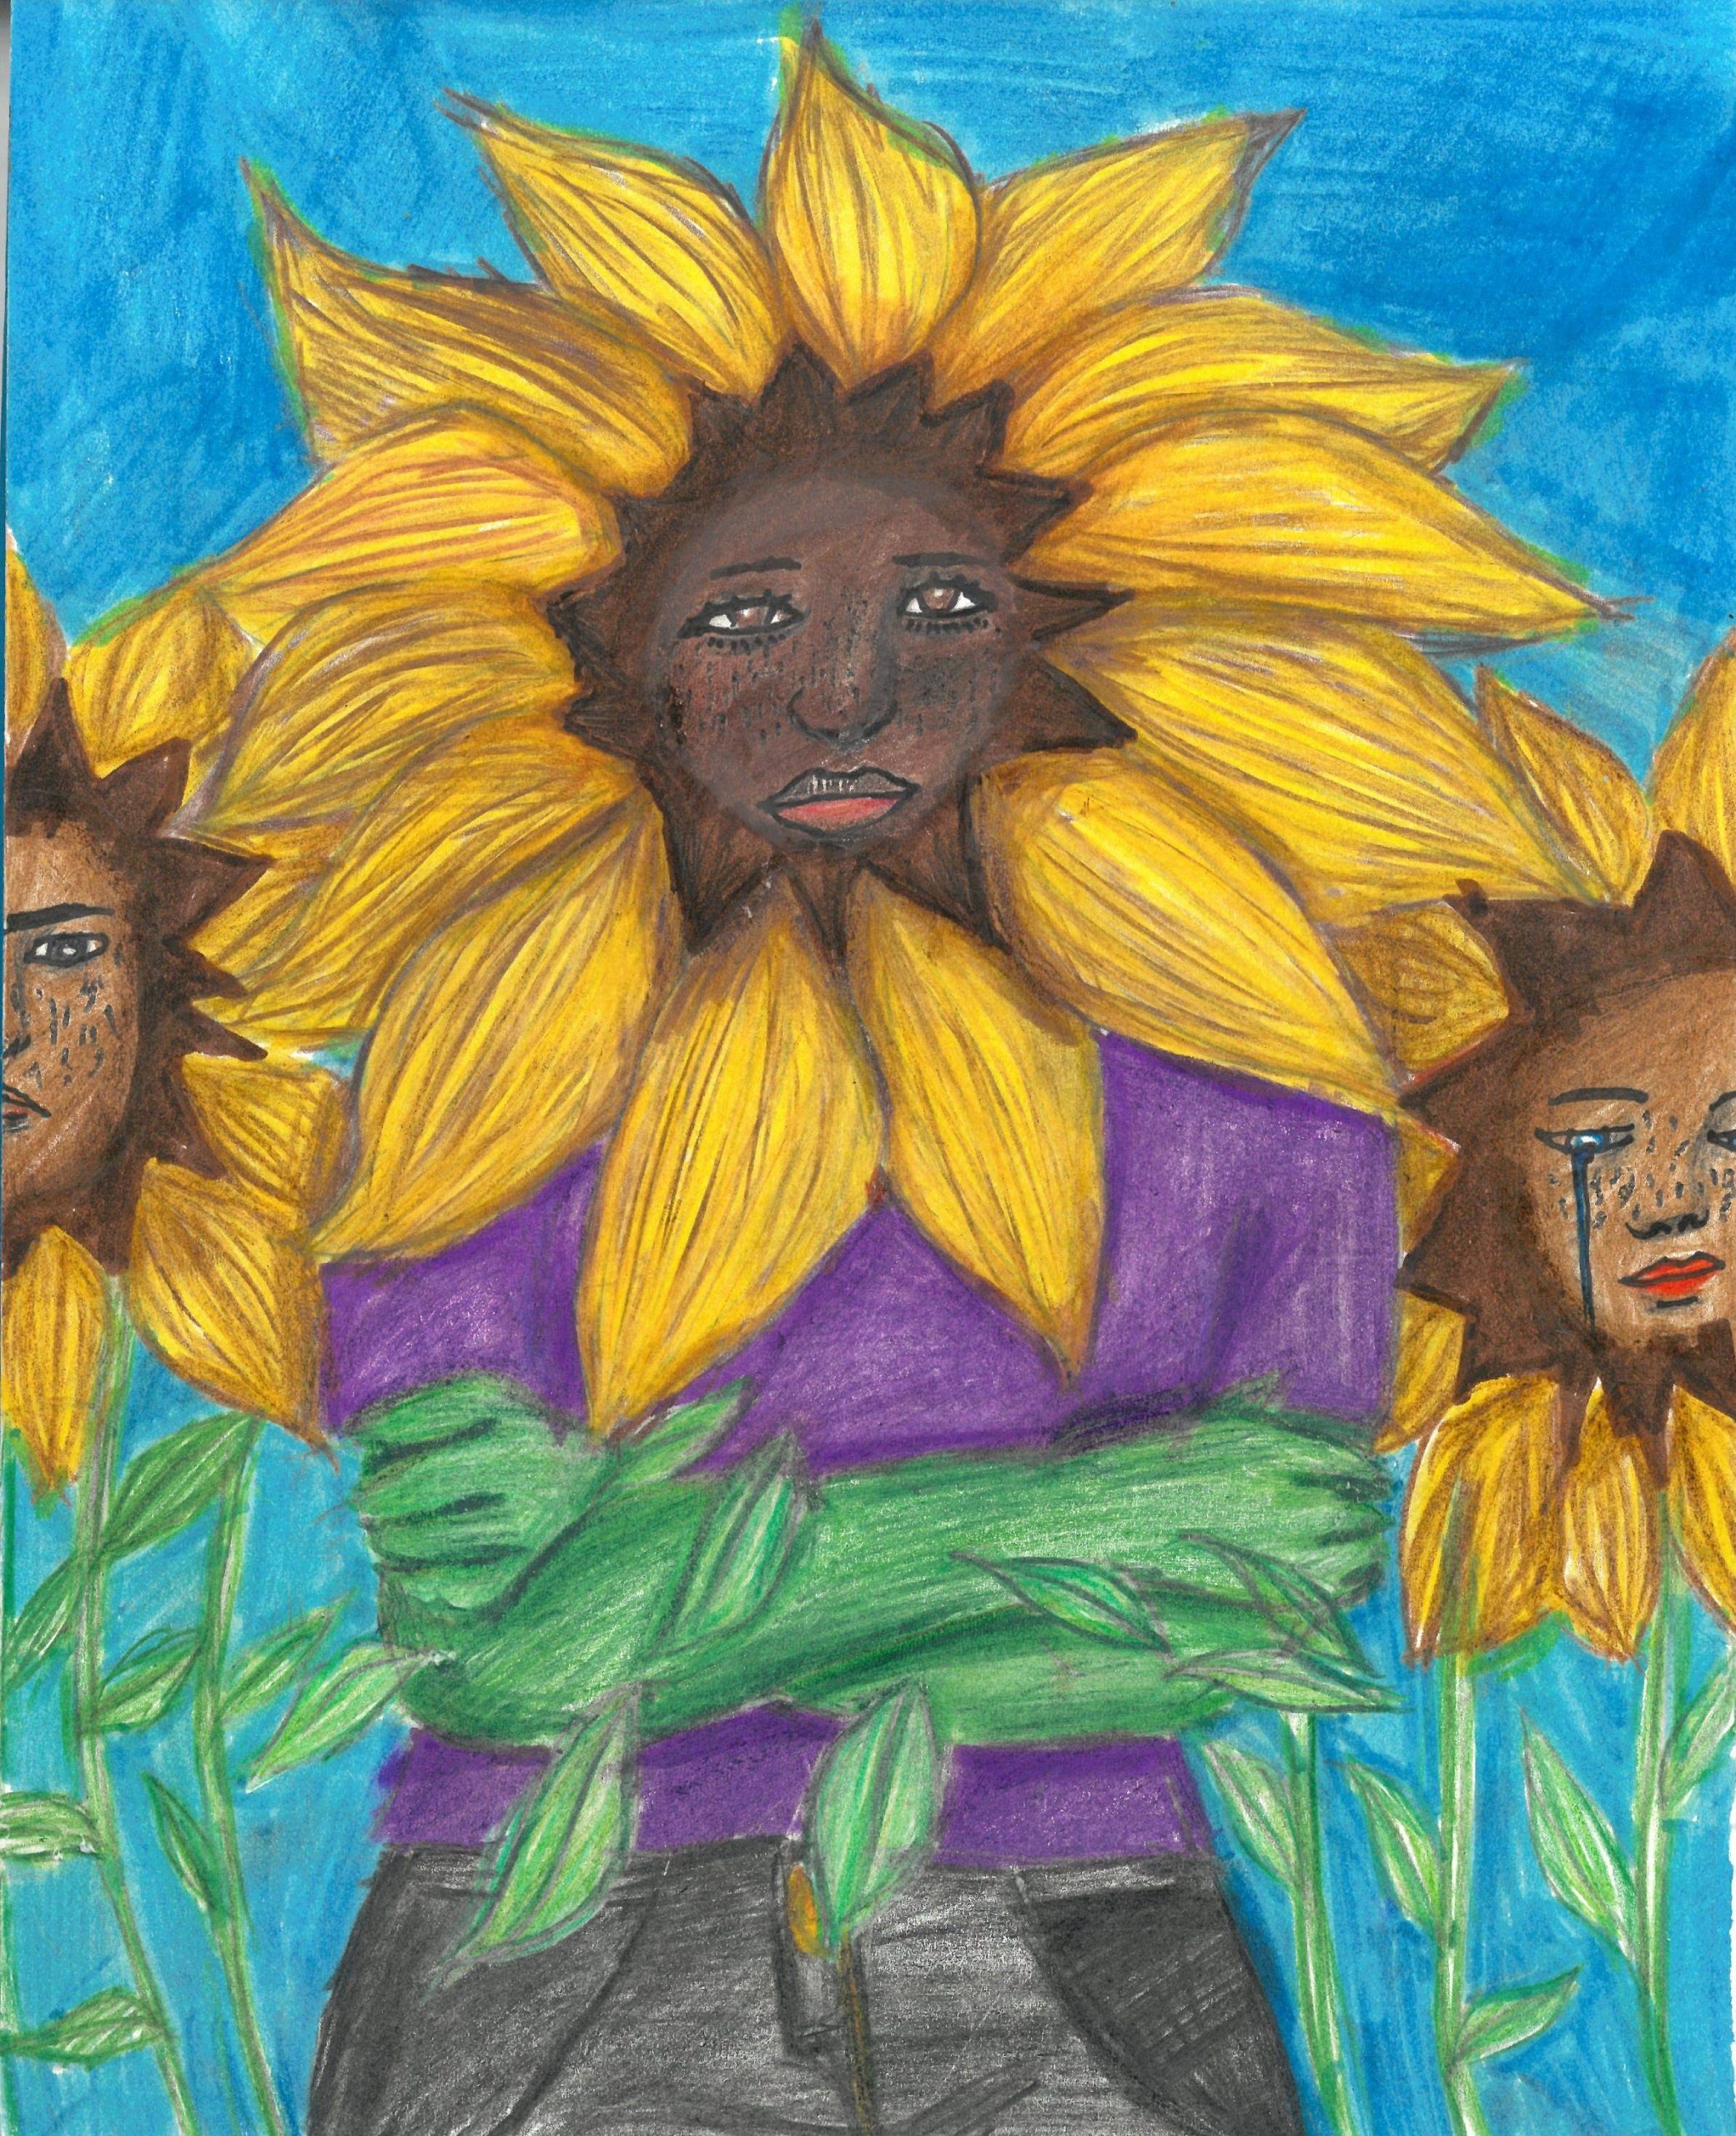 Three humans with sunflower heads